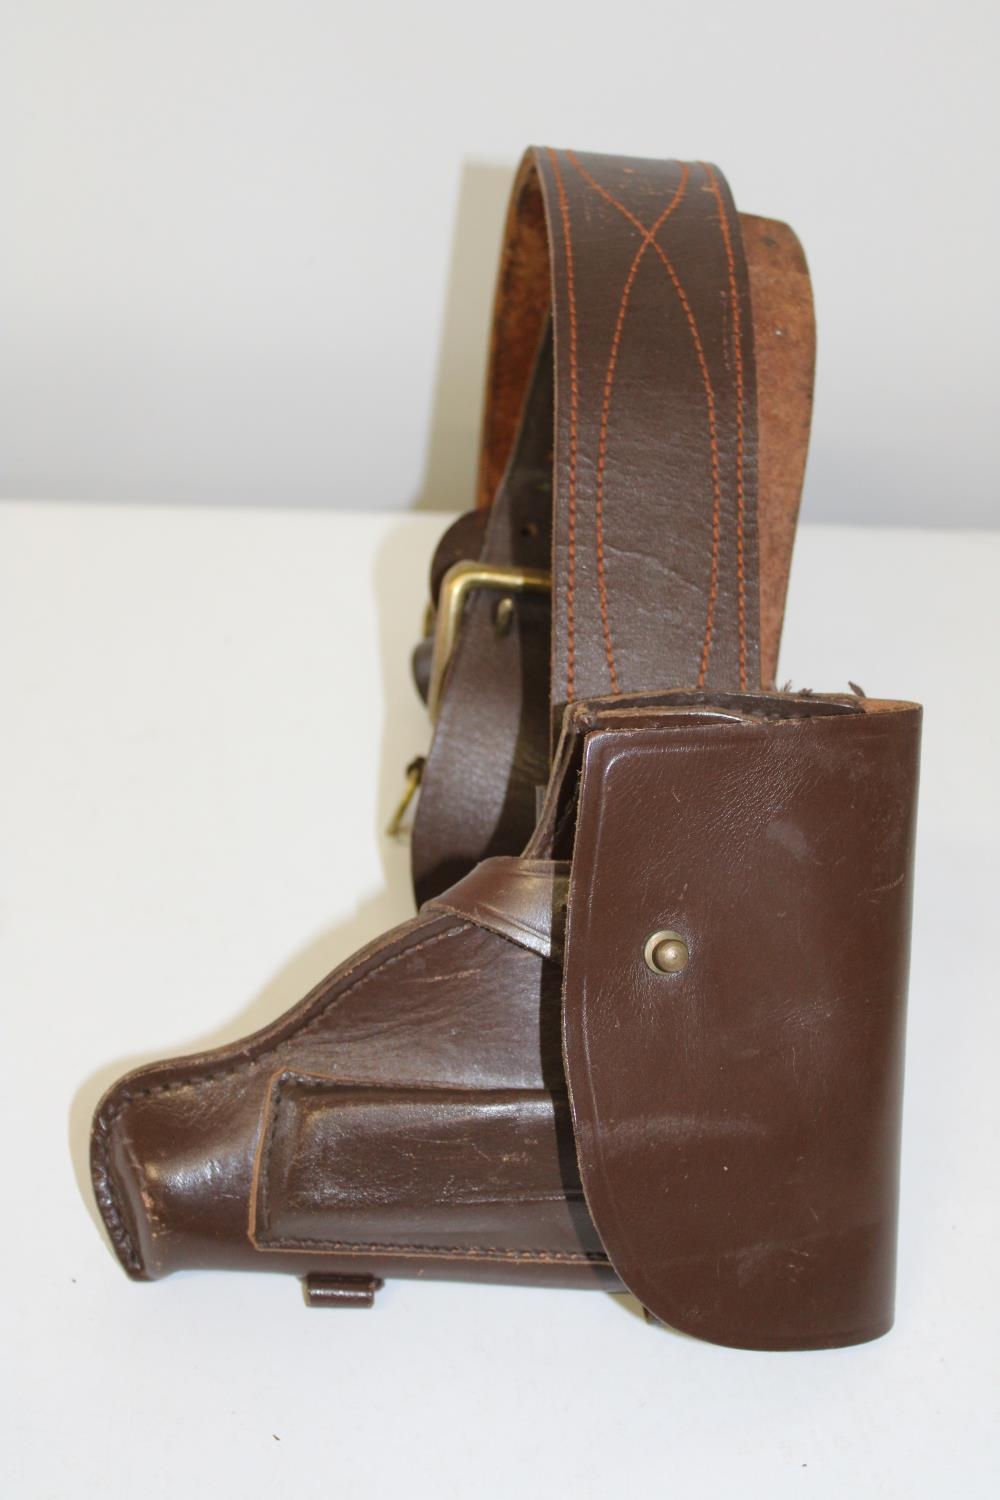 A re-production leather belt & holster